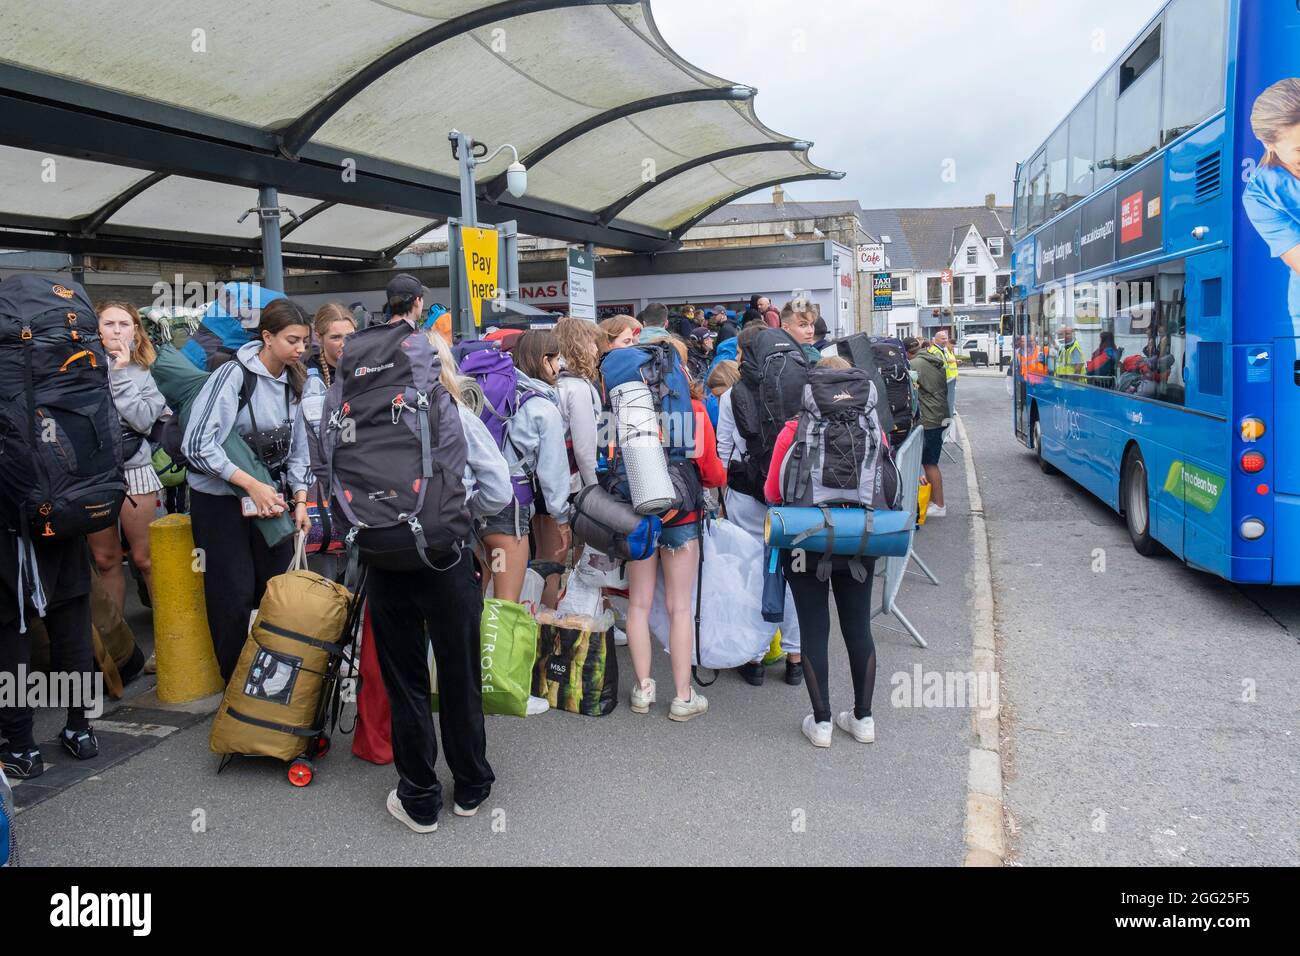 Young Festivalgoers queueing outside Newquay Train Station waiting for buses to transport them to the Boardmasters Festival in Newquay in Cornwall. Stock Photo